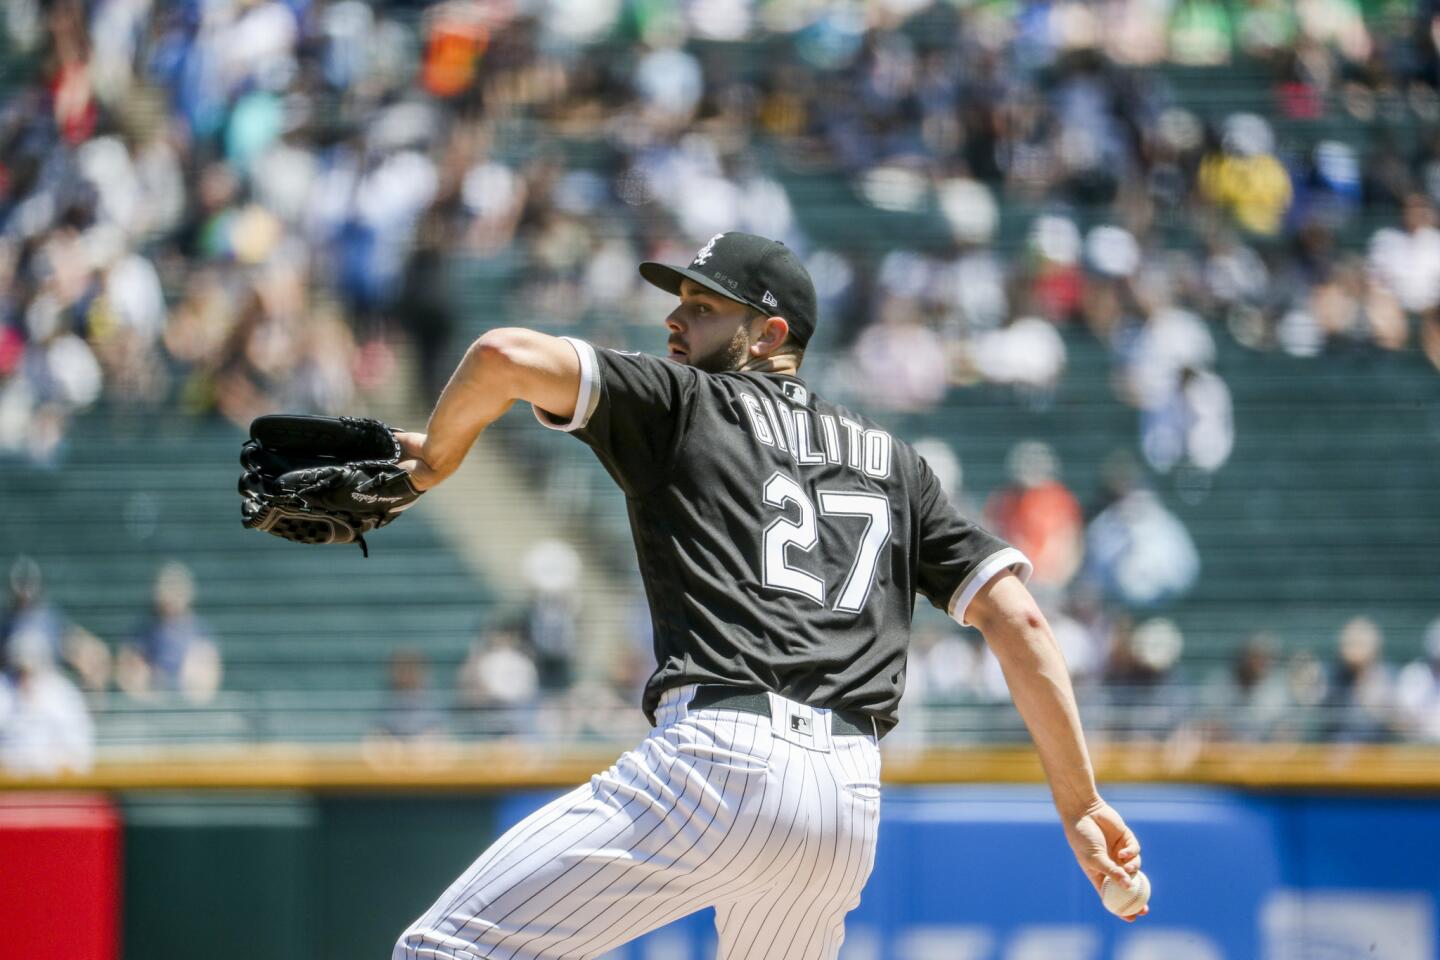 White Sox starter Lucas Giolito pitches during the first inning against the Orioles at Guaranteed Rate Field on Thursday May 24, 2018.